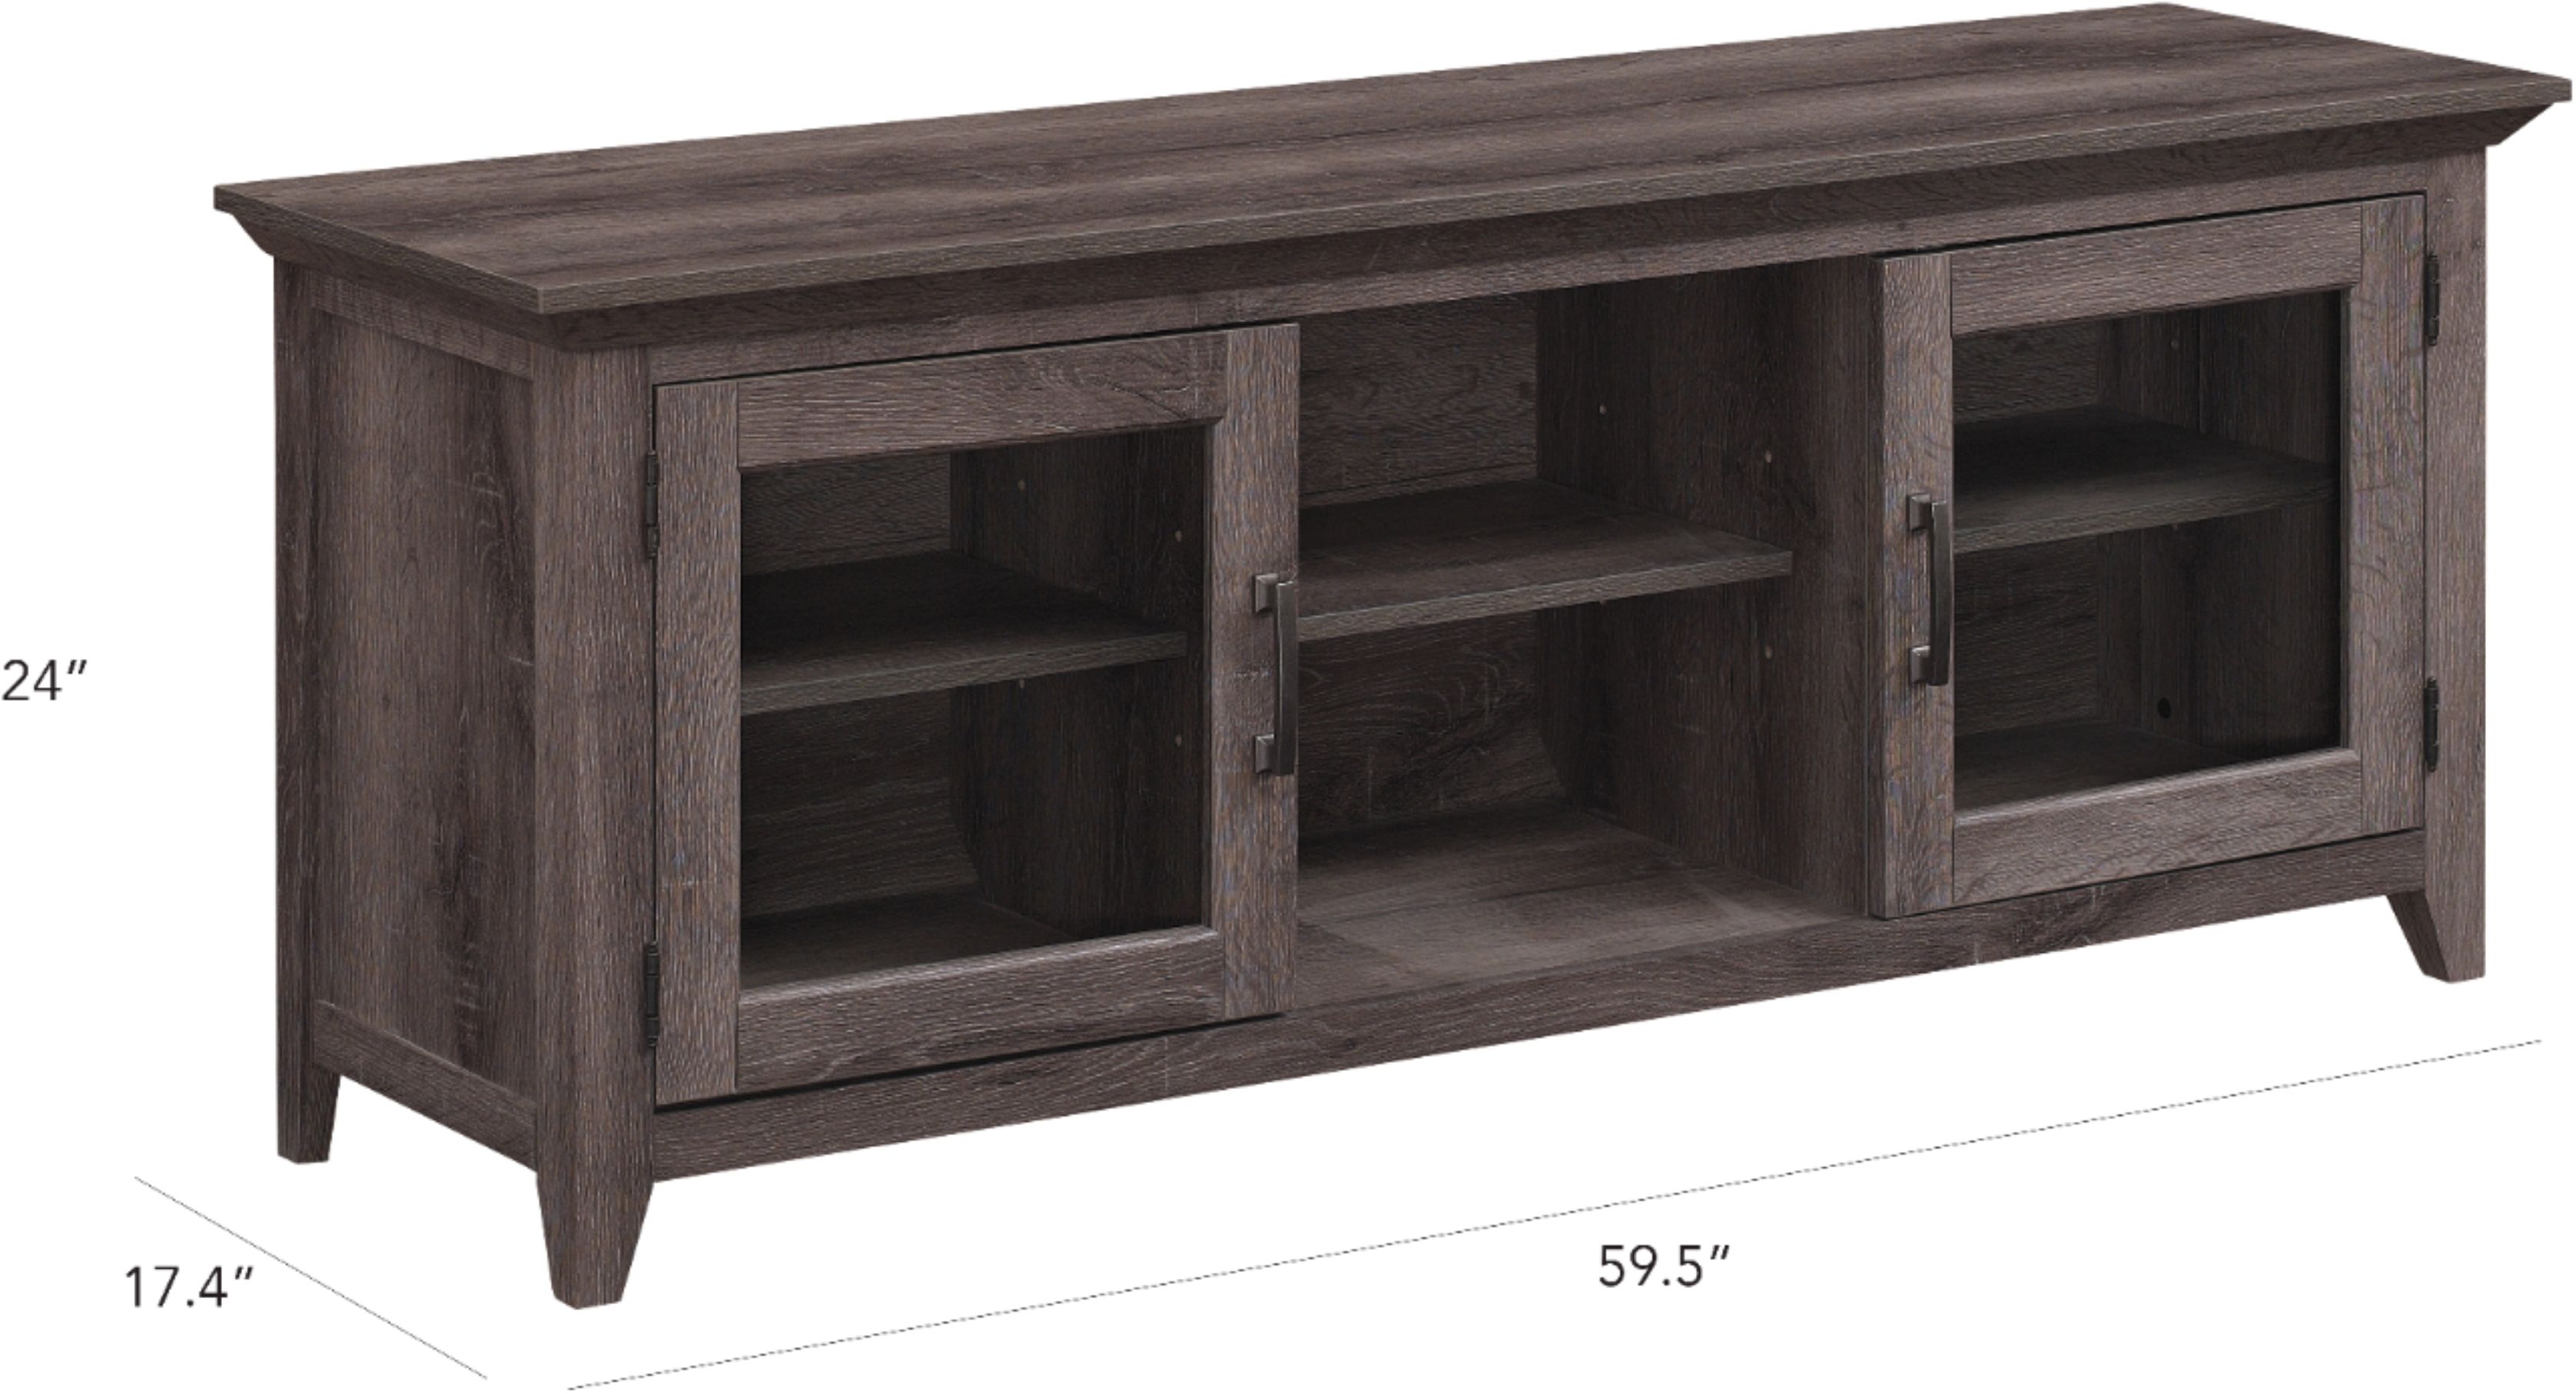 Angle View: CorLiving - Bakersfield TV Stand, For TVs up to 55" - Ravenwood Black